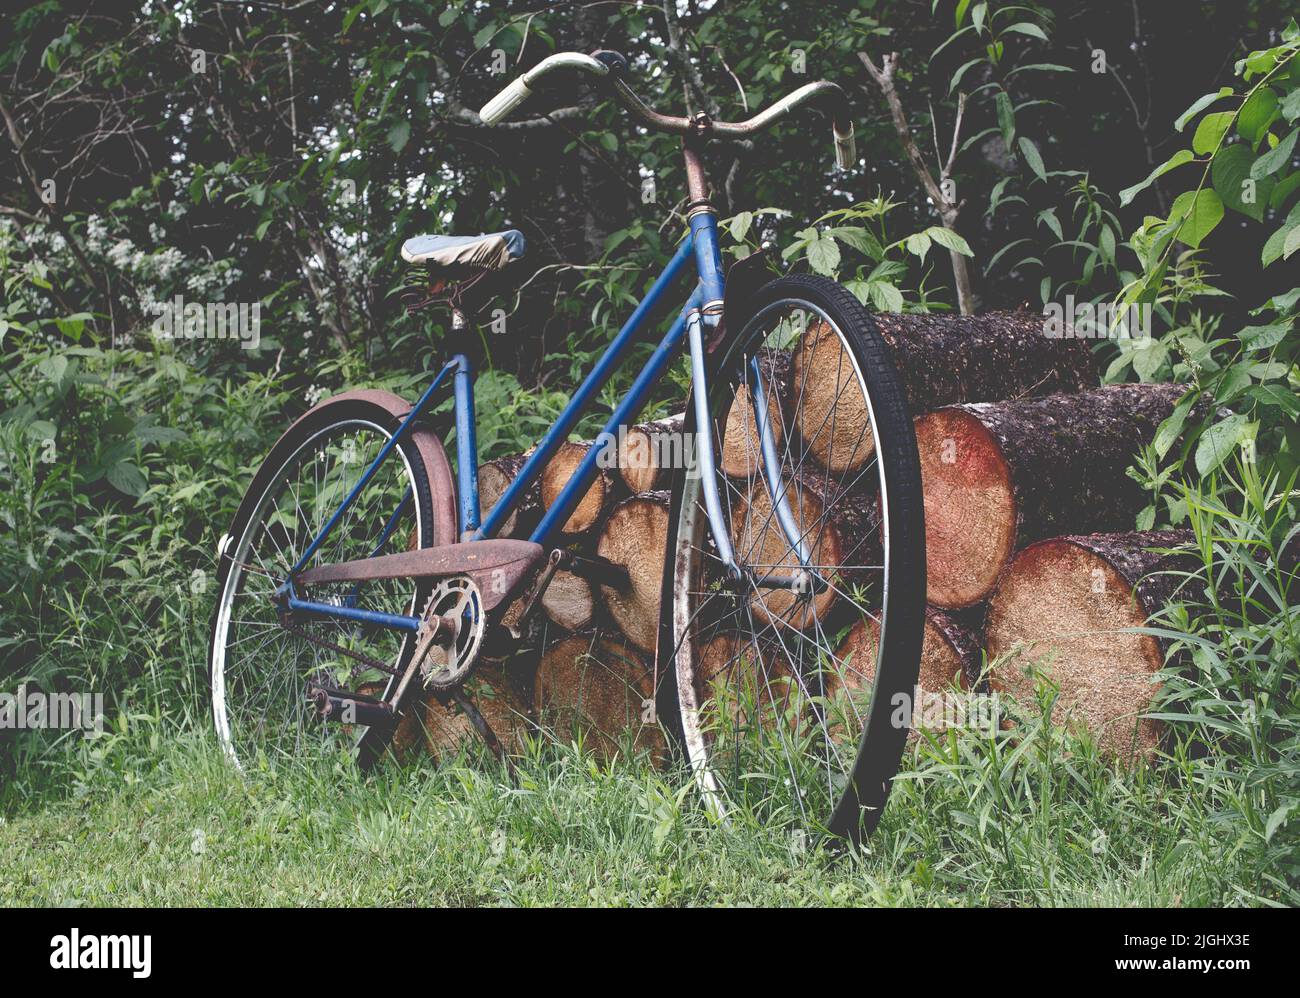 Old bicycle leaning against wood pile with a vintage faded look Stock Photo